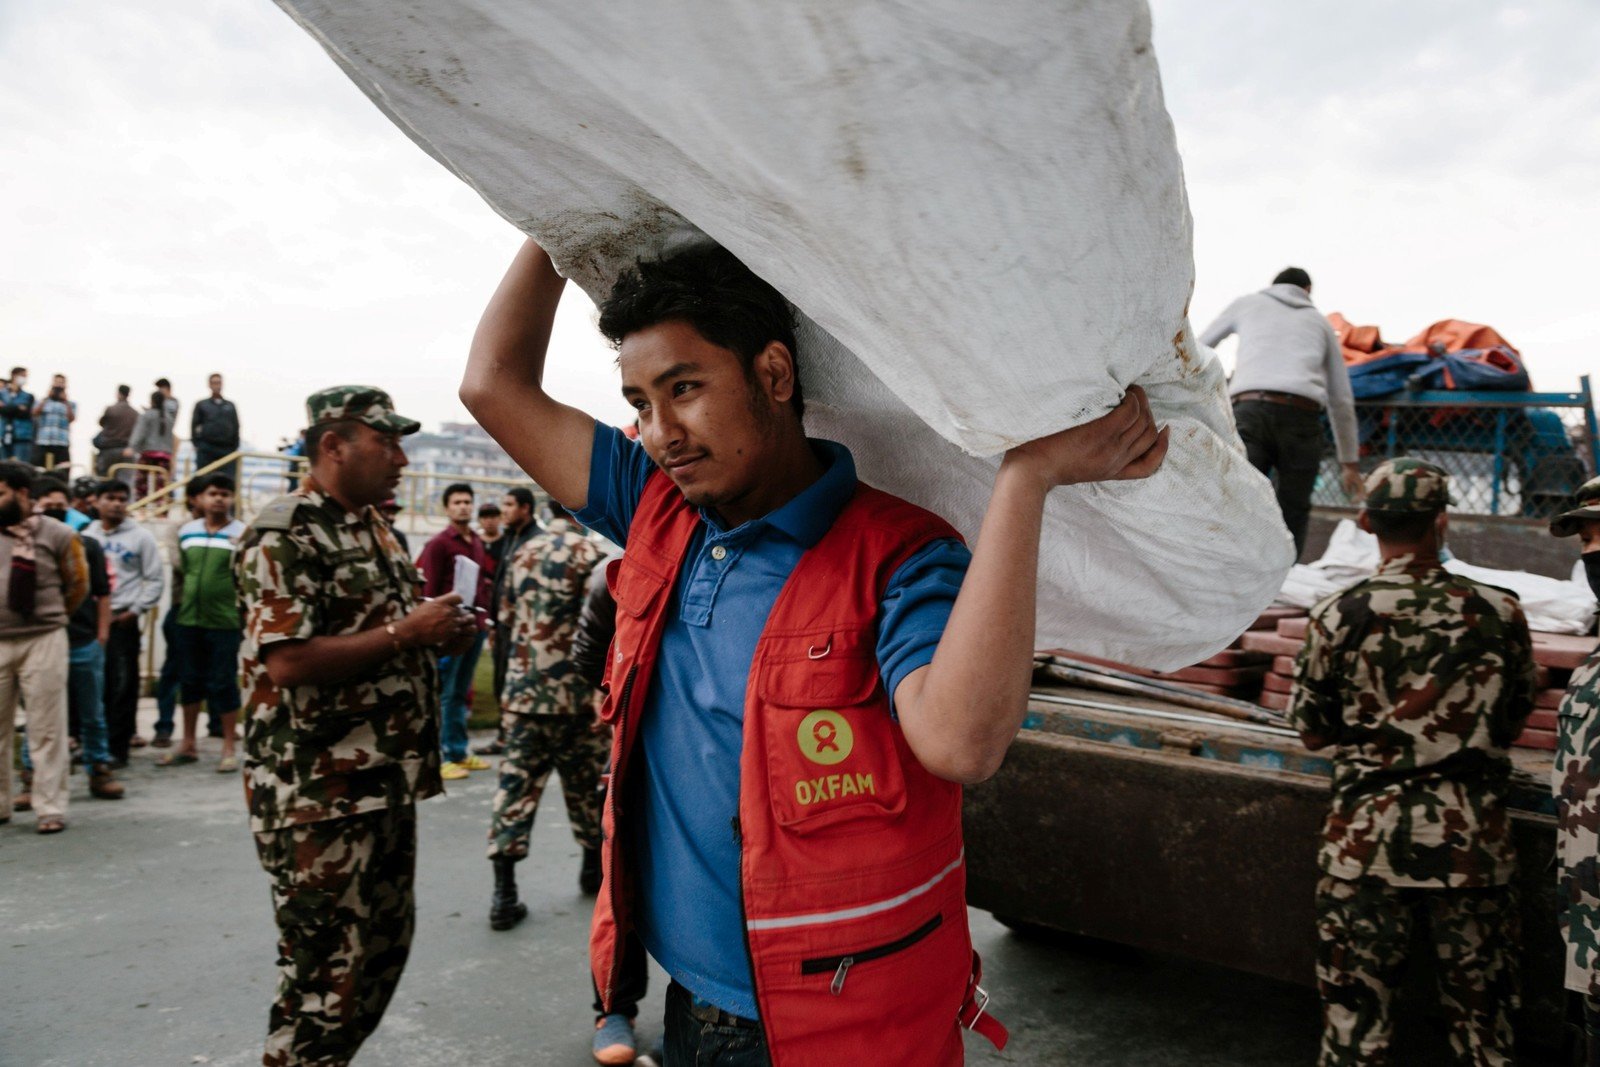 PR2：Having previously received training through Oxfam’s urban risk management programme, Shekhou Khadka (23) stayed in the Tundikhel camp after the earthquake to help with Oxfam’s relief work and serve his community. (Aubrey Wade / Oxfam)